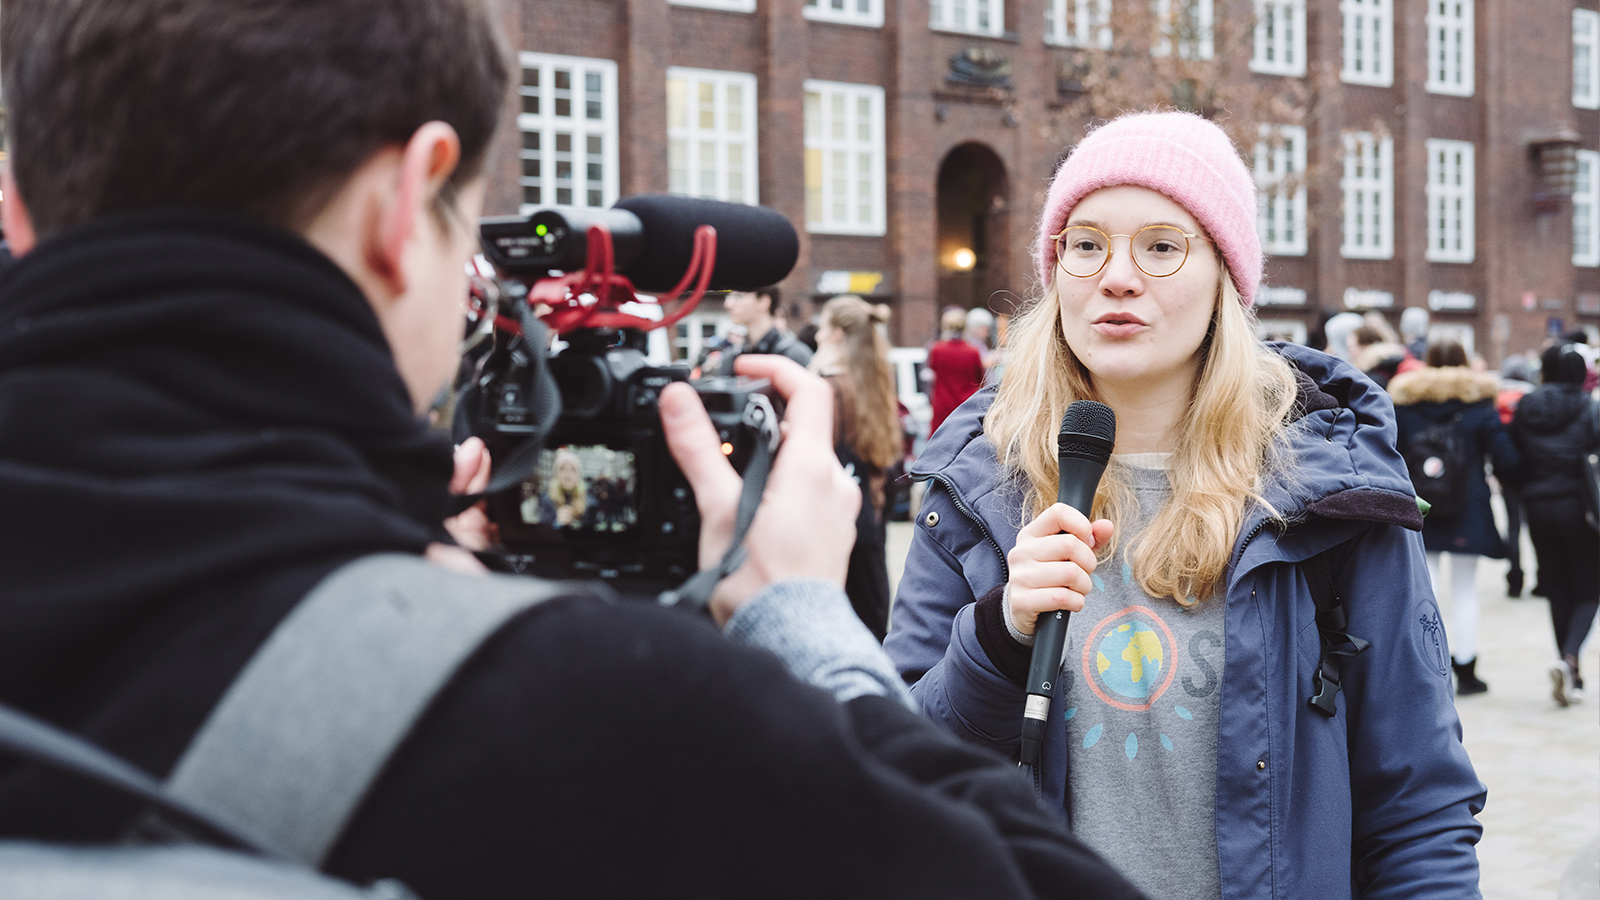 ecosia-joins-climate-strike-march-fridays-for-the-future-greta-thunberg-1